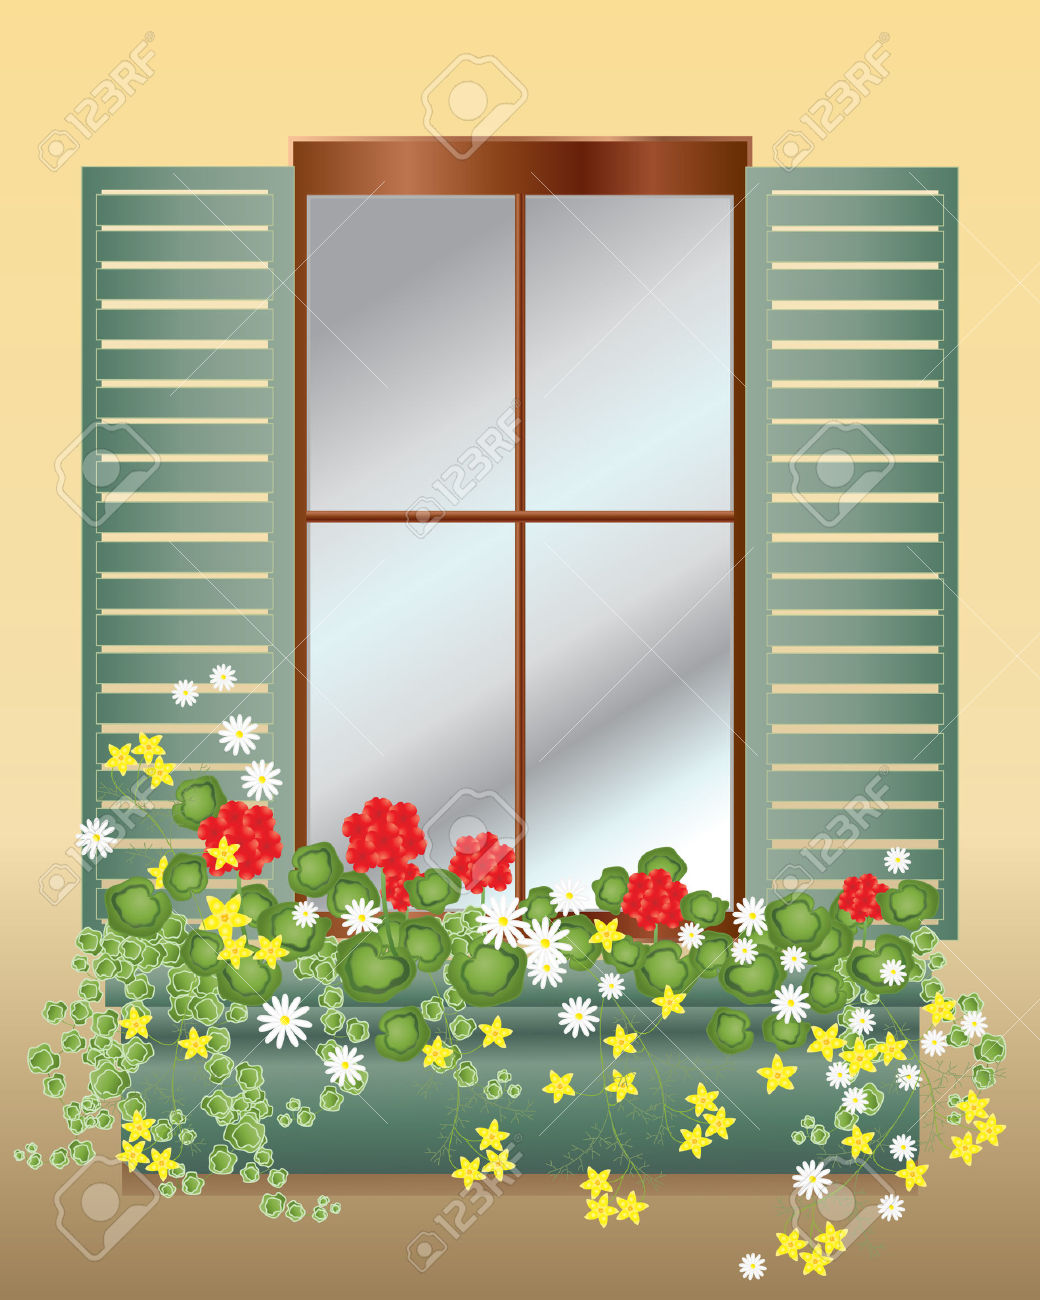 clipart house shutters - photo #2